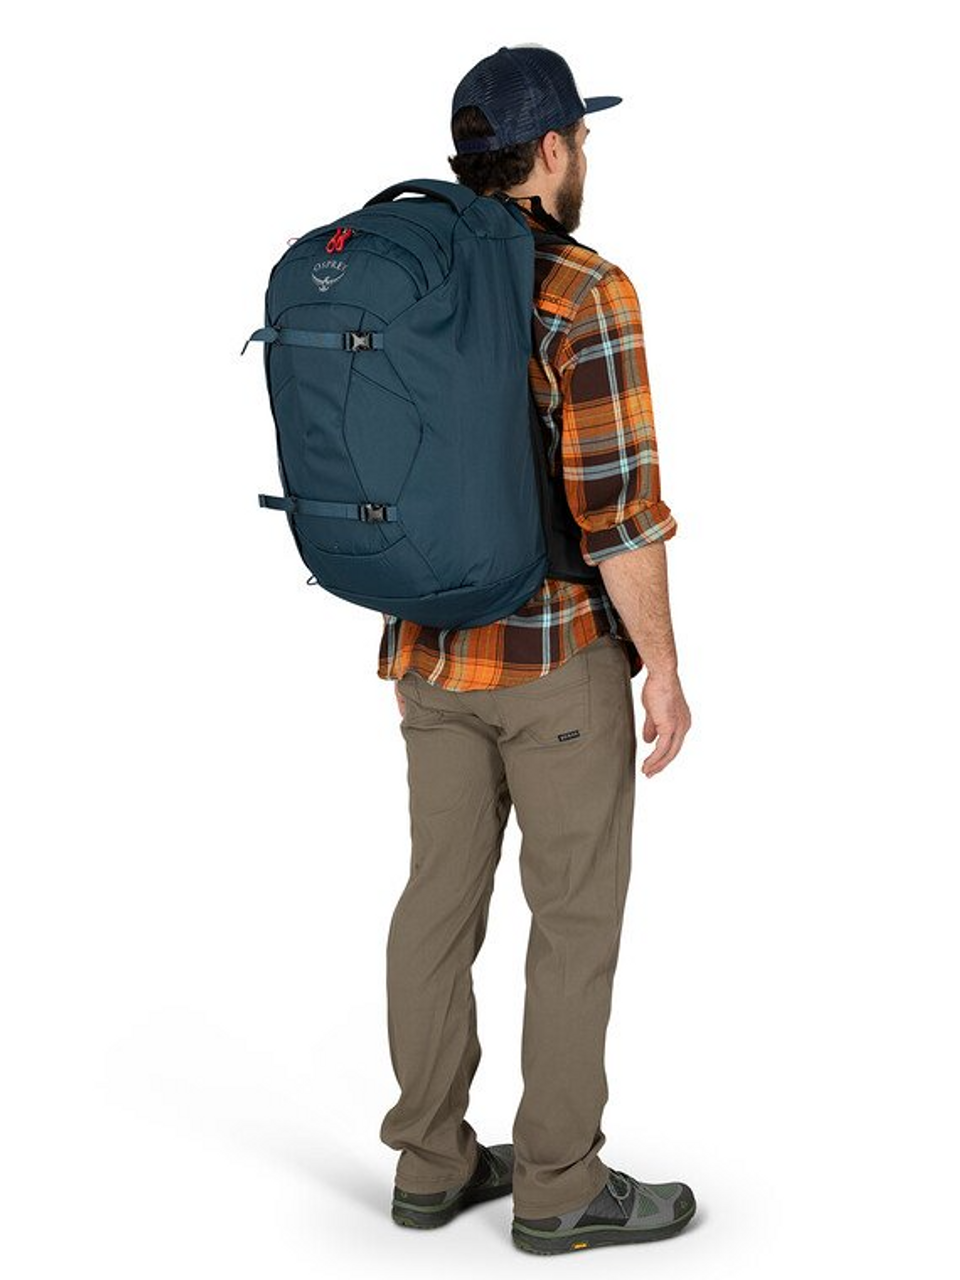 Osprey Farpoint 40 Travel Backpack Review - Rugged and Popular 40L